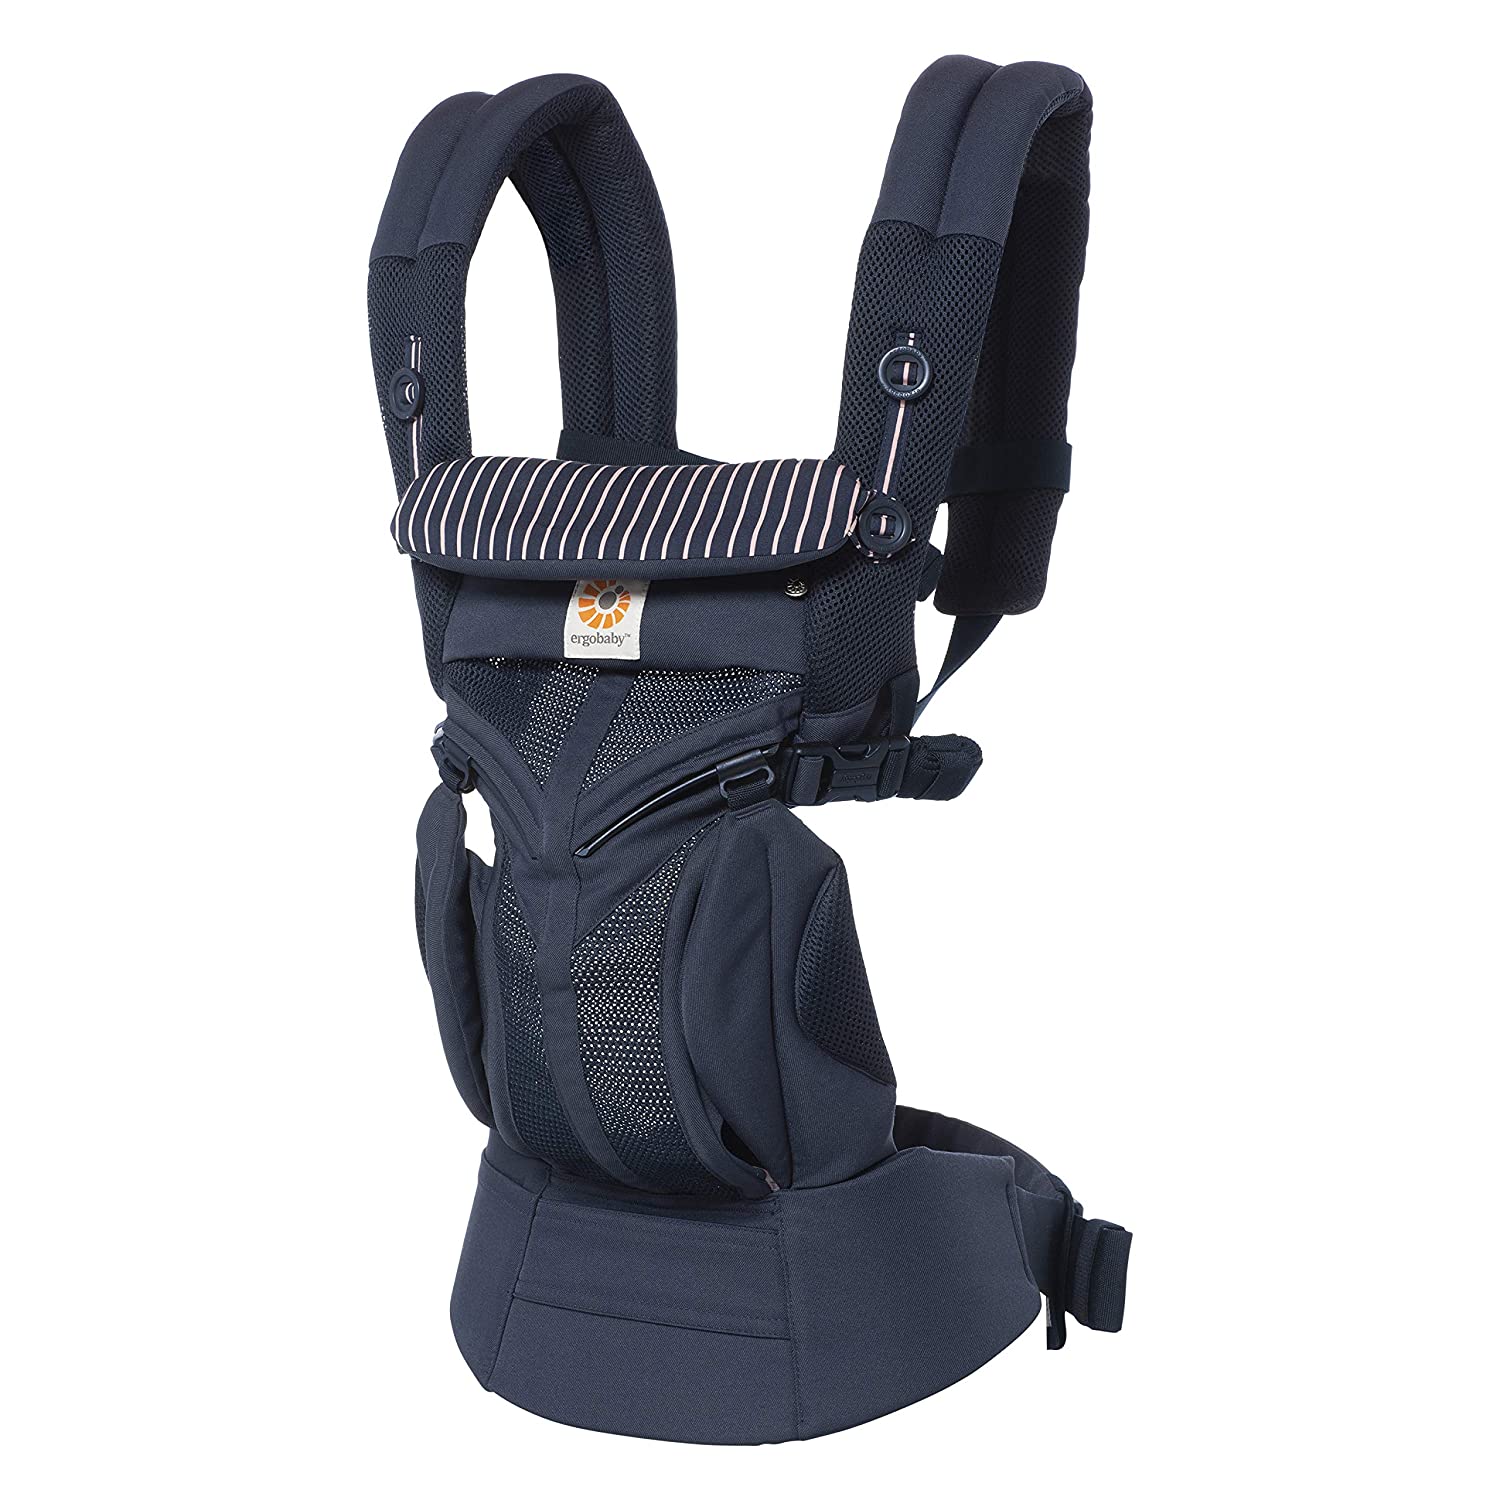 Ergobaby Baby Carrier For Newborns From Birth Up To 20 Kg, 4-In-1 Omni 360 